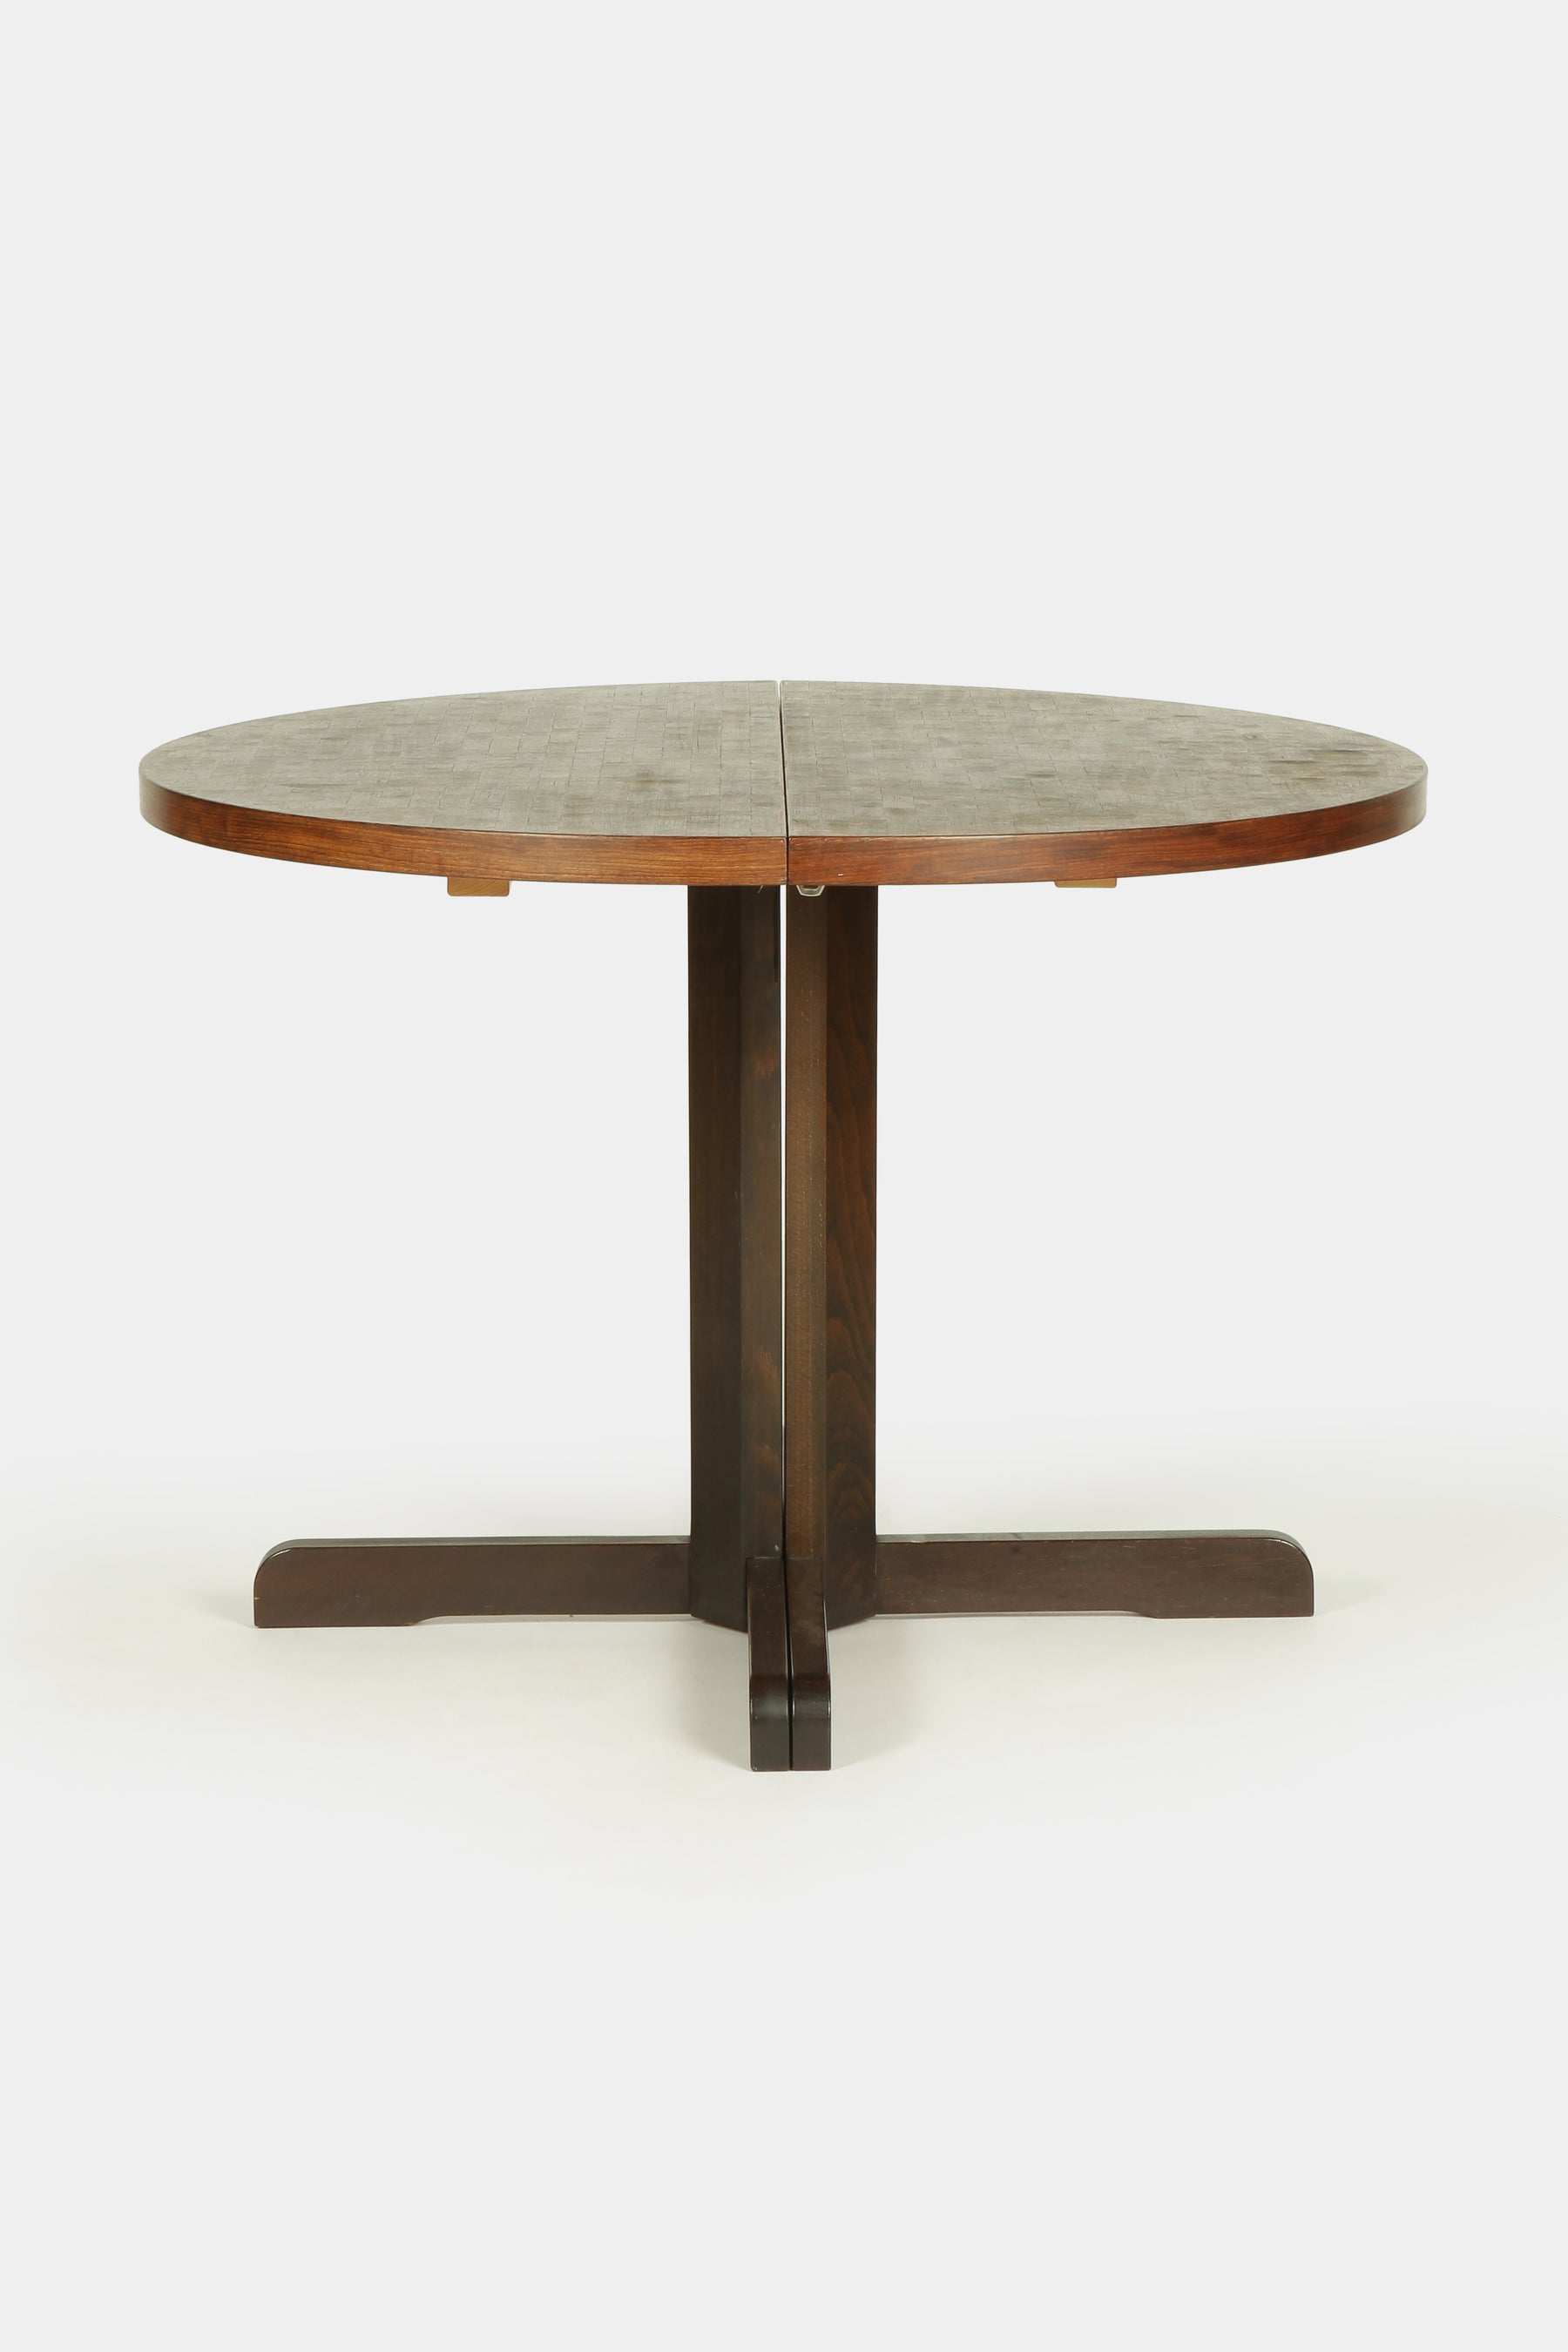 Multifunctional DW Table with Club Table, 60s